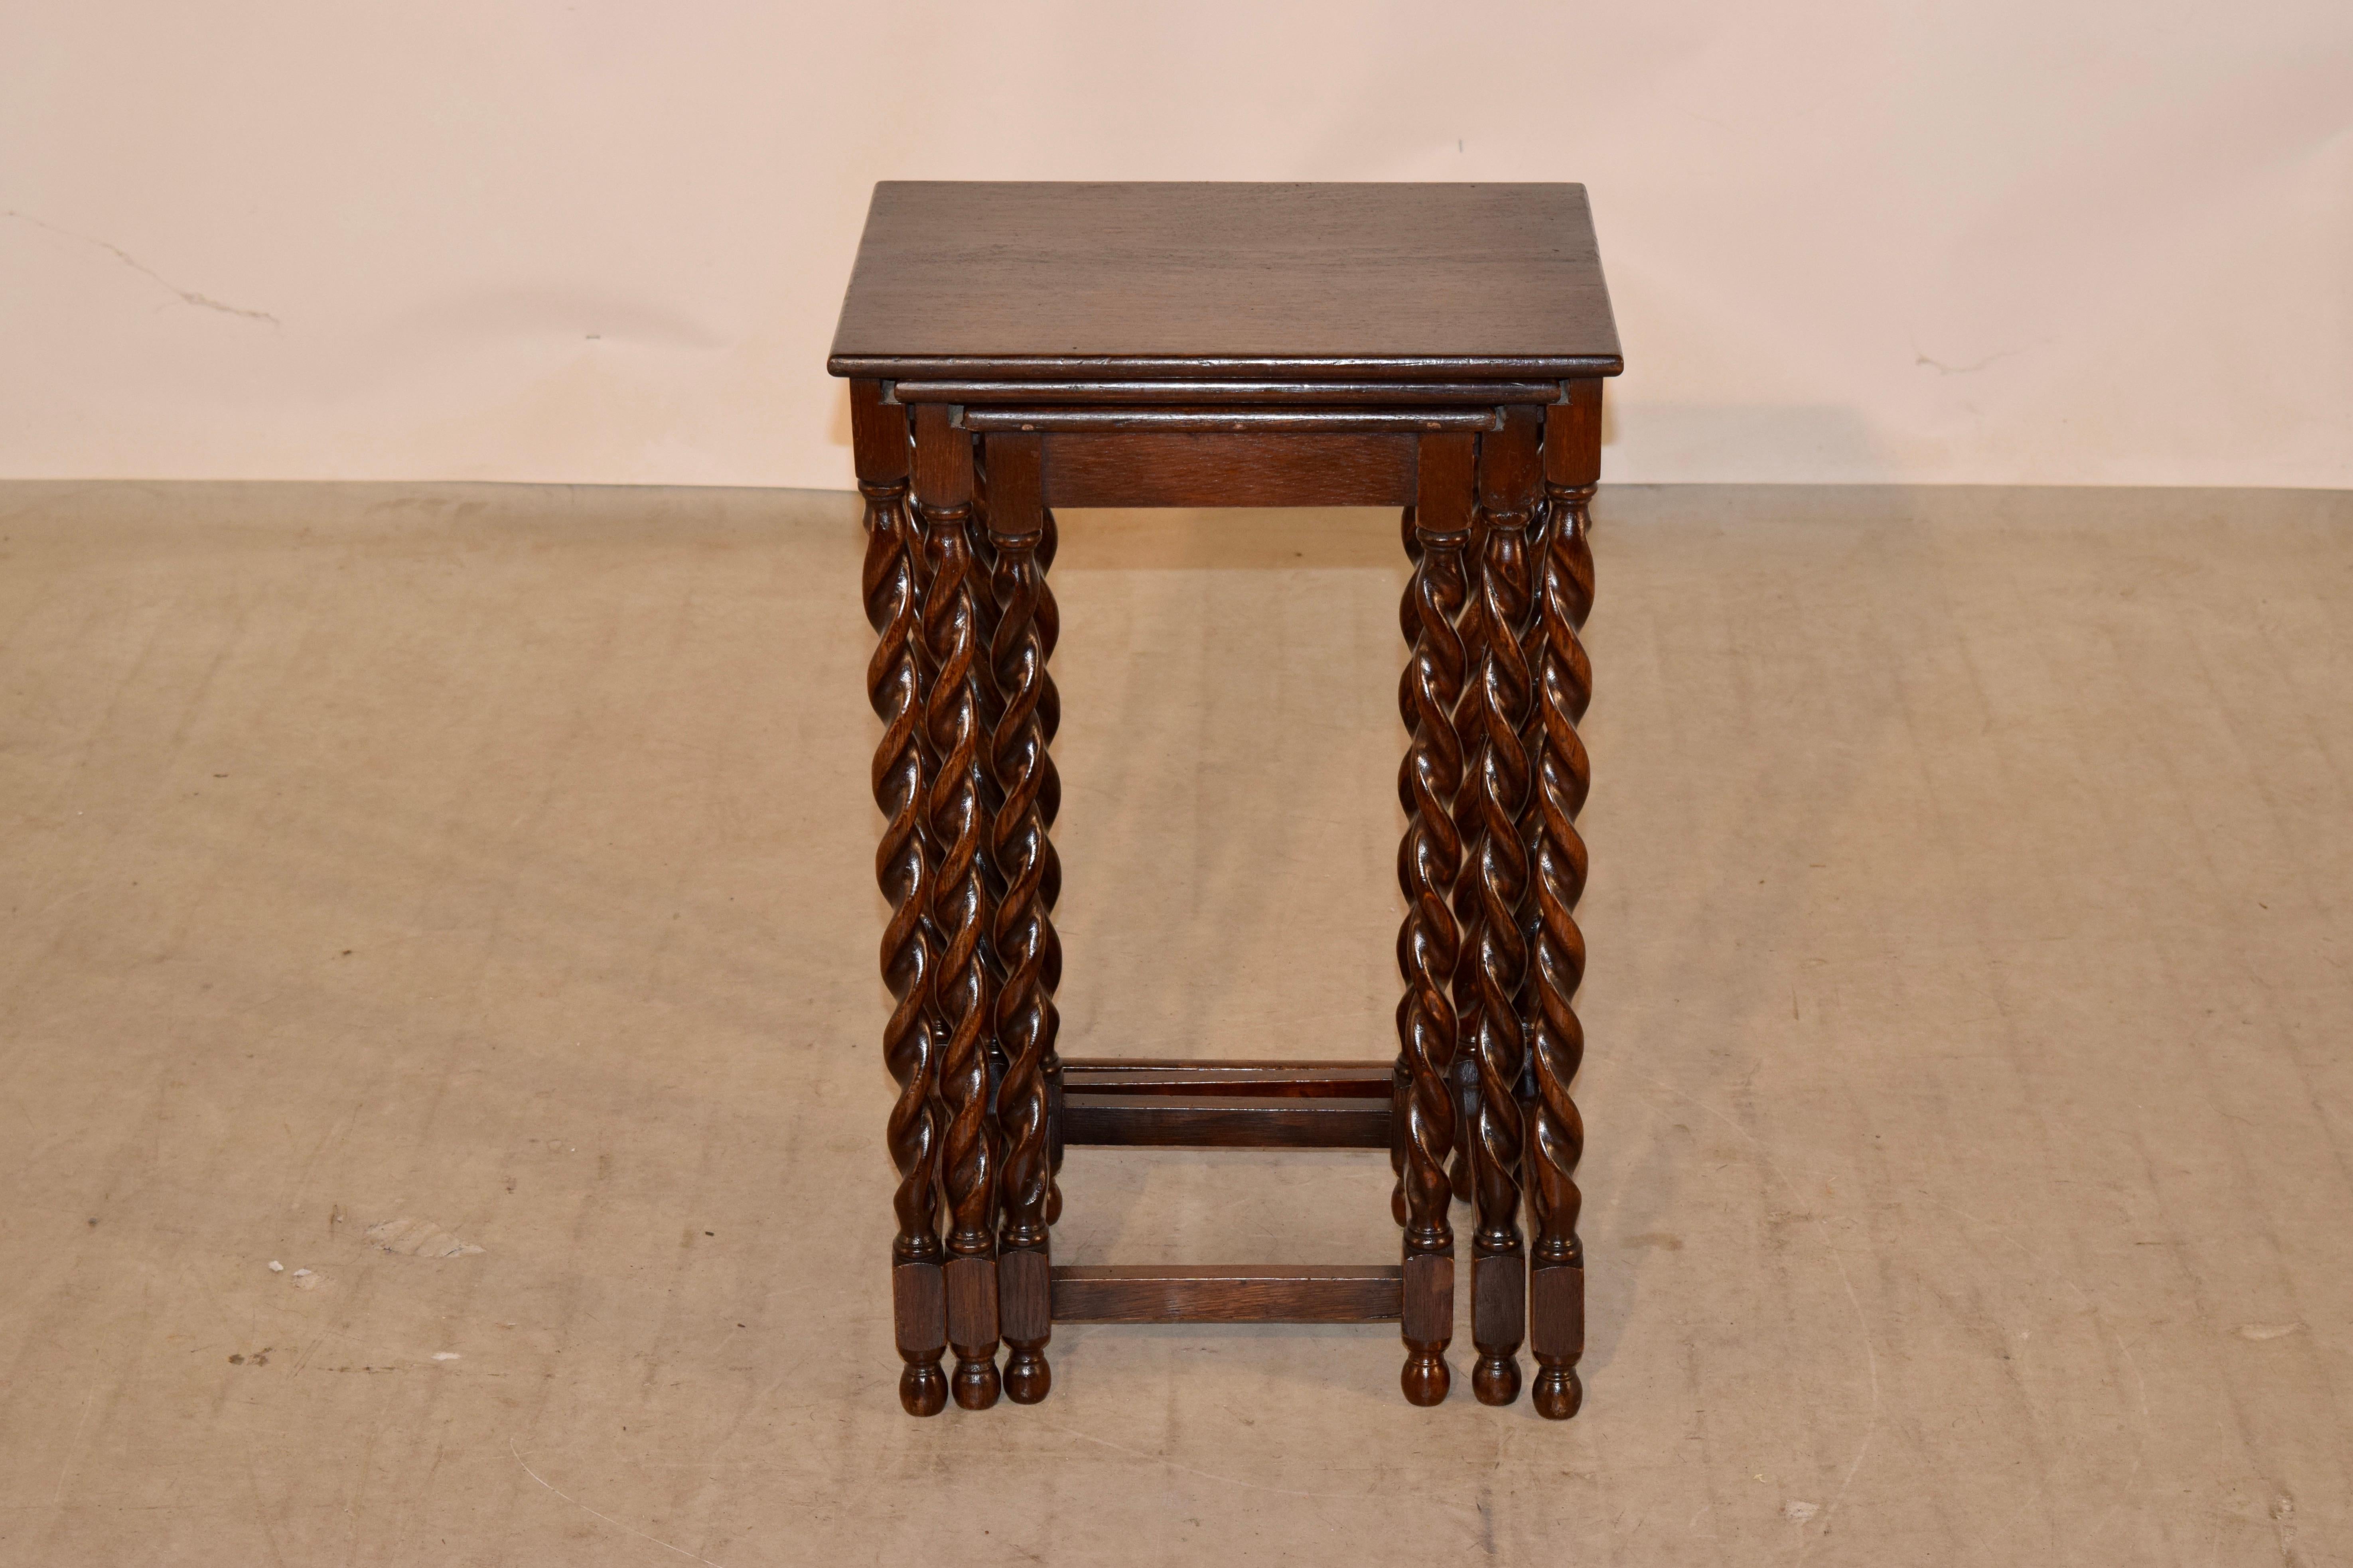 Set of three oak nesting tables from England, circa 1900. The tops have simple lines and are supported on hand turned barley twist legs, joined by simple stretchers. The largest table measures 15.5 W x 12.88 D x 24 H, the medium table measures 13 W